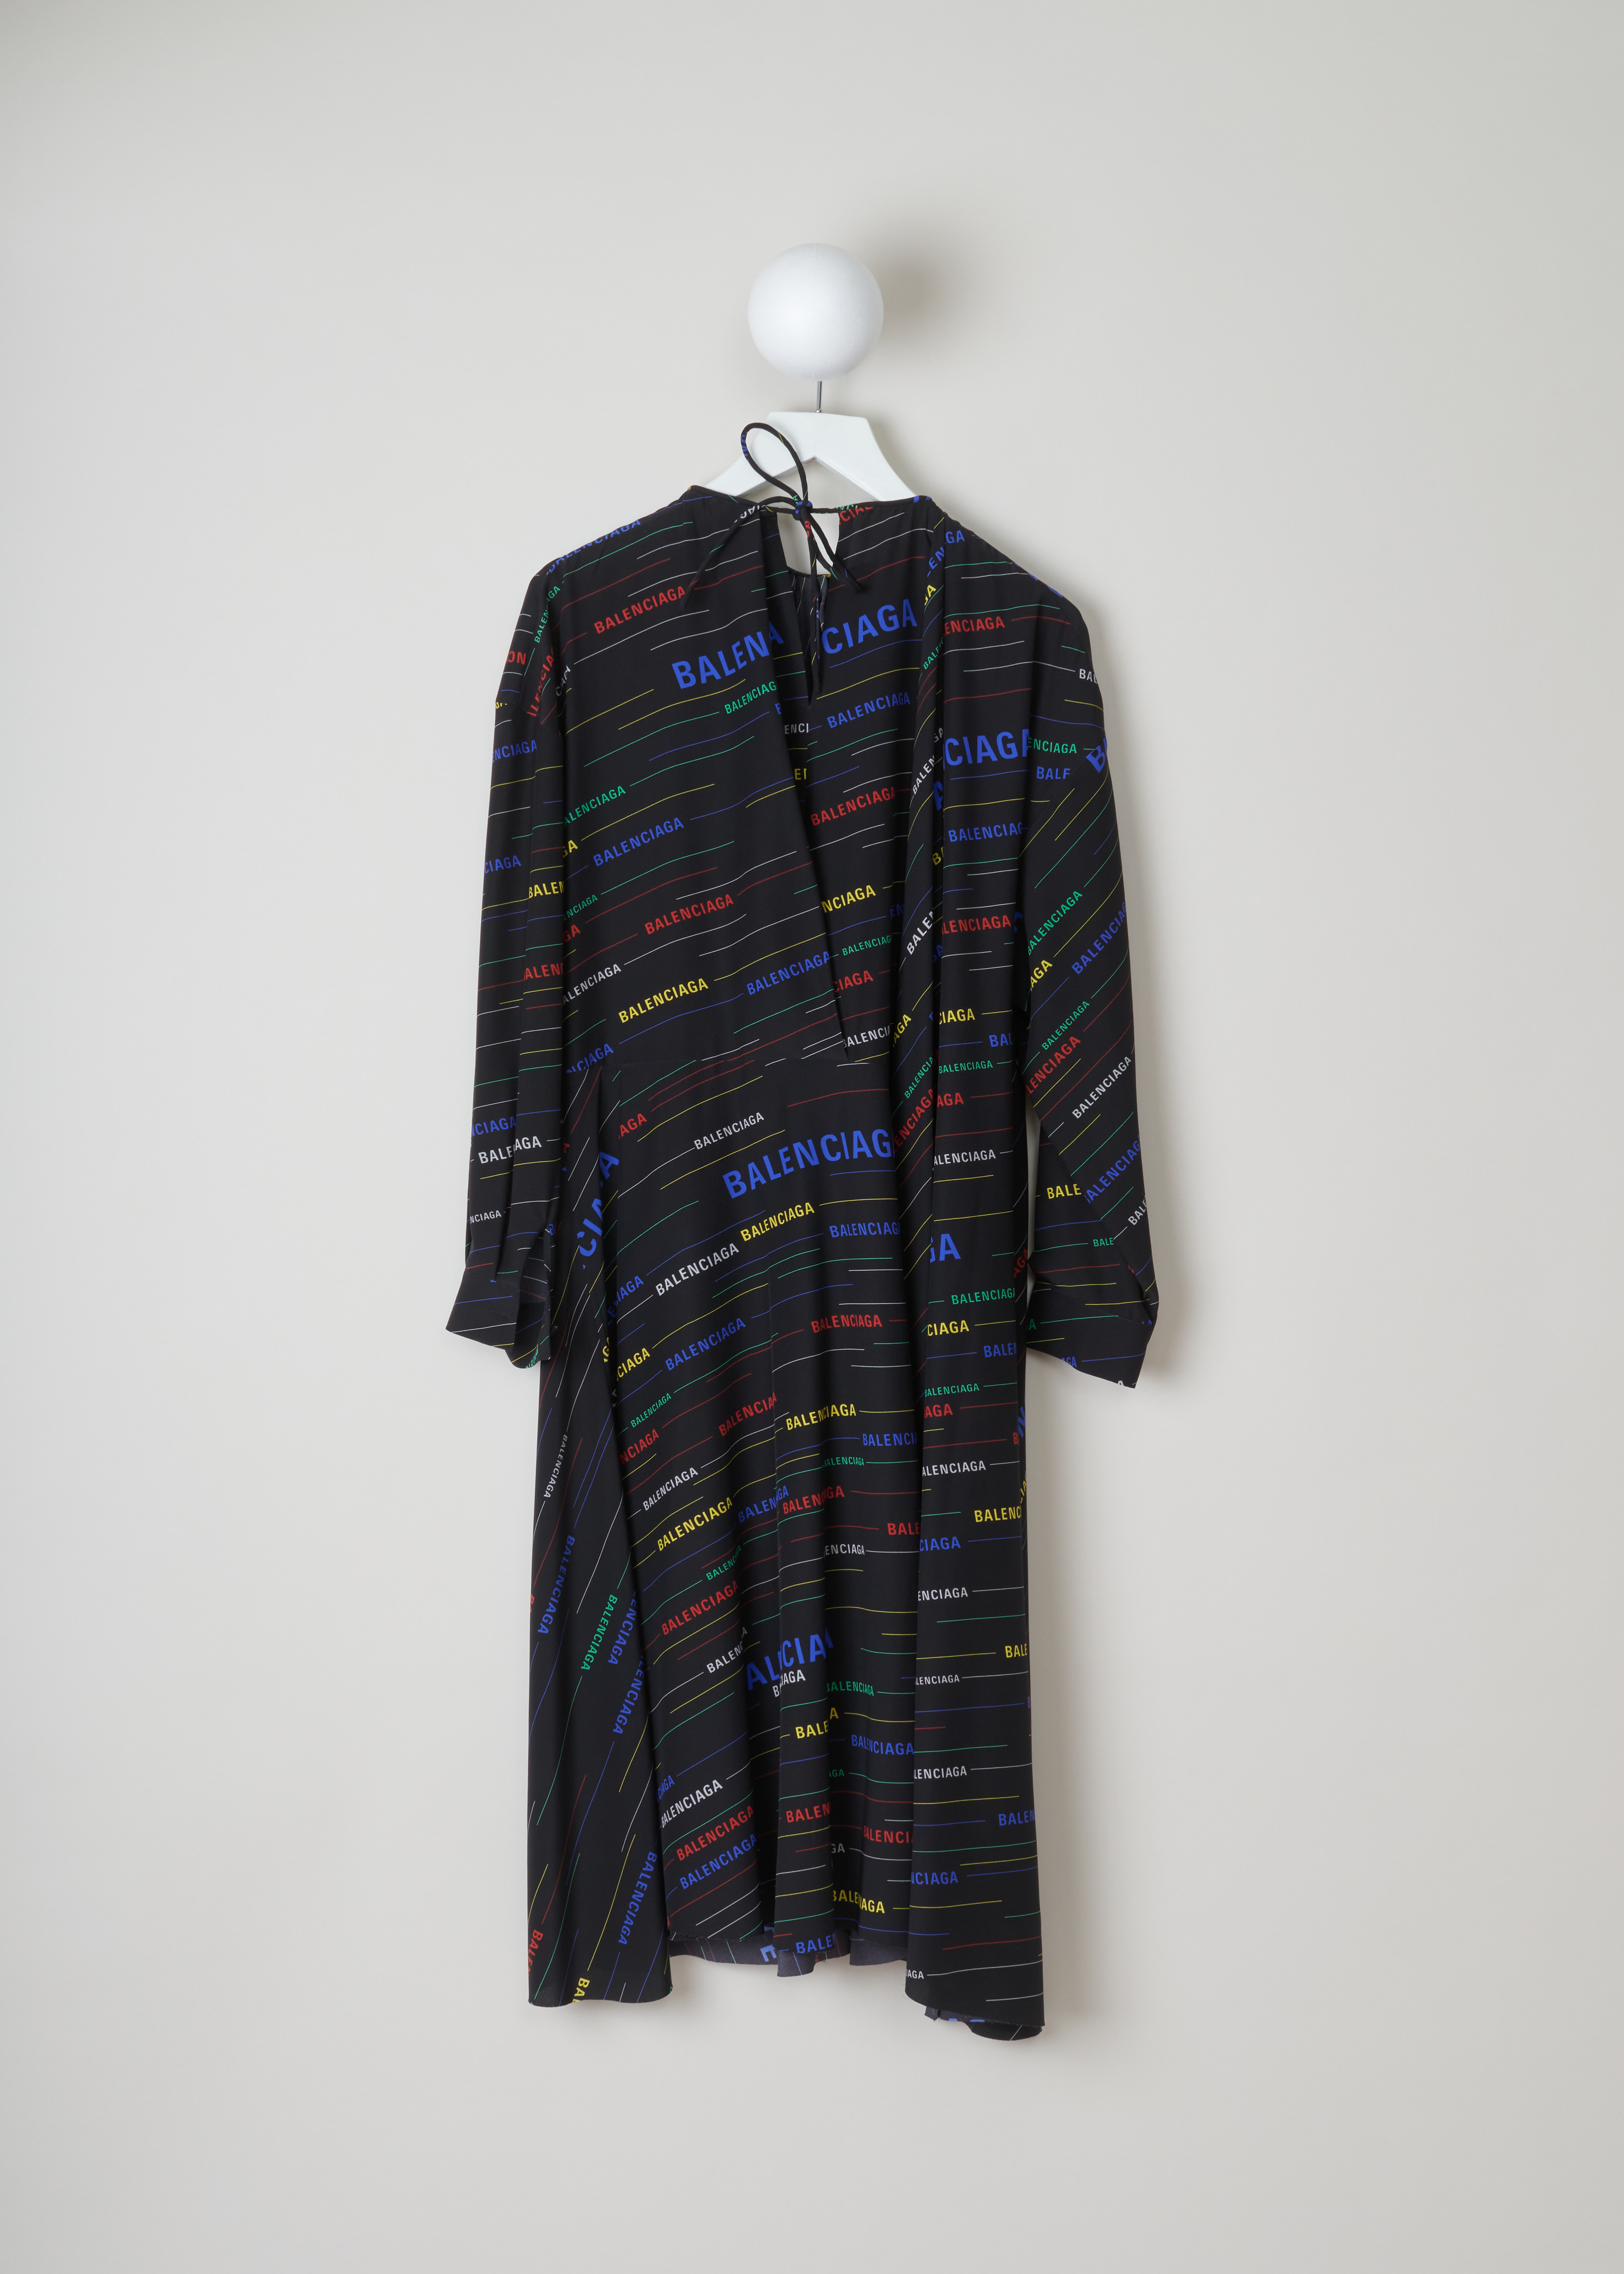 Balenciaga Logo printed dress 556343_TDL55_2771 black multicolour back. Black silk dress with multicolour diagonal logo print, gathered rounded neckline, buttoned cuffs and a self-tie bow fastening on the back.